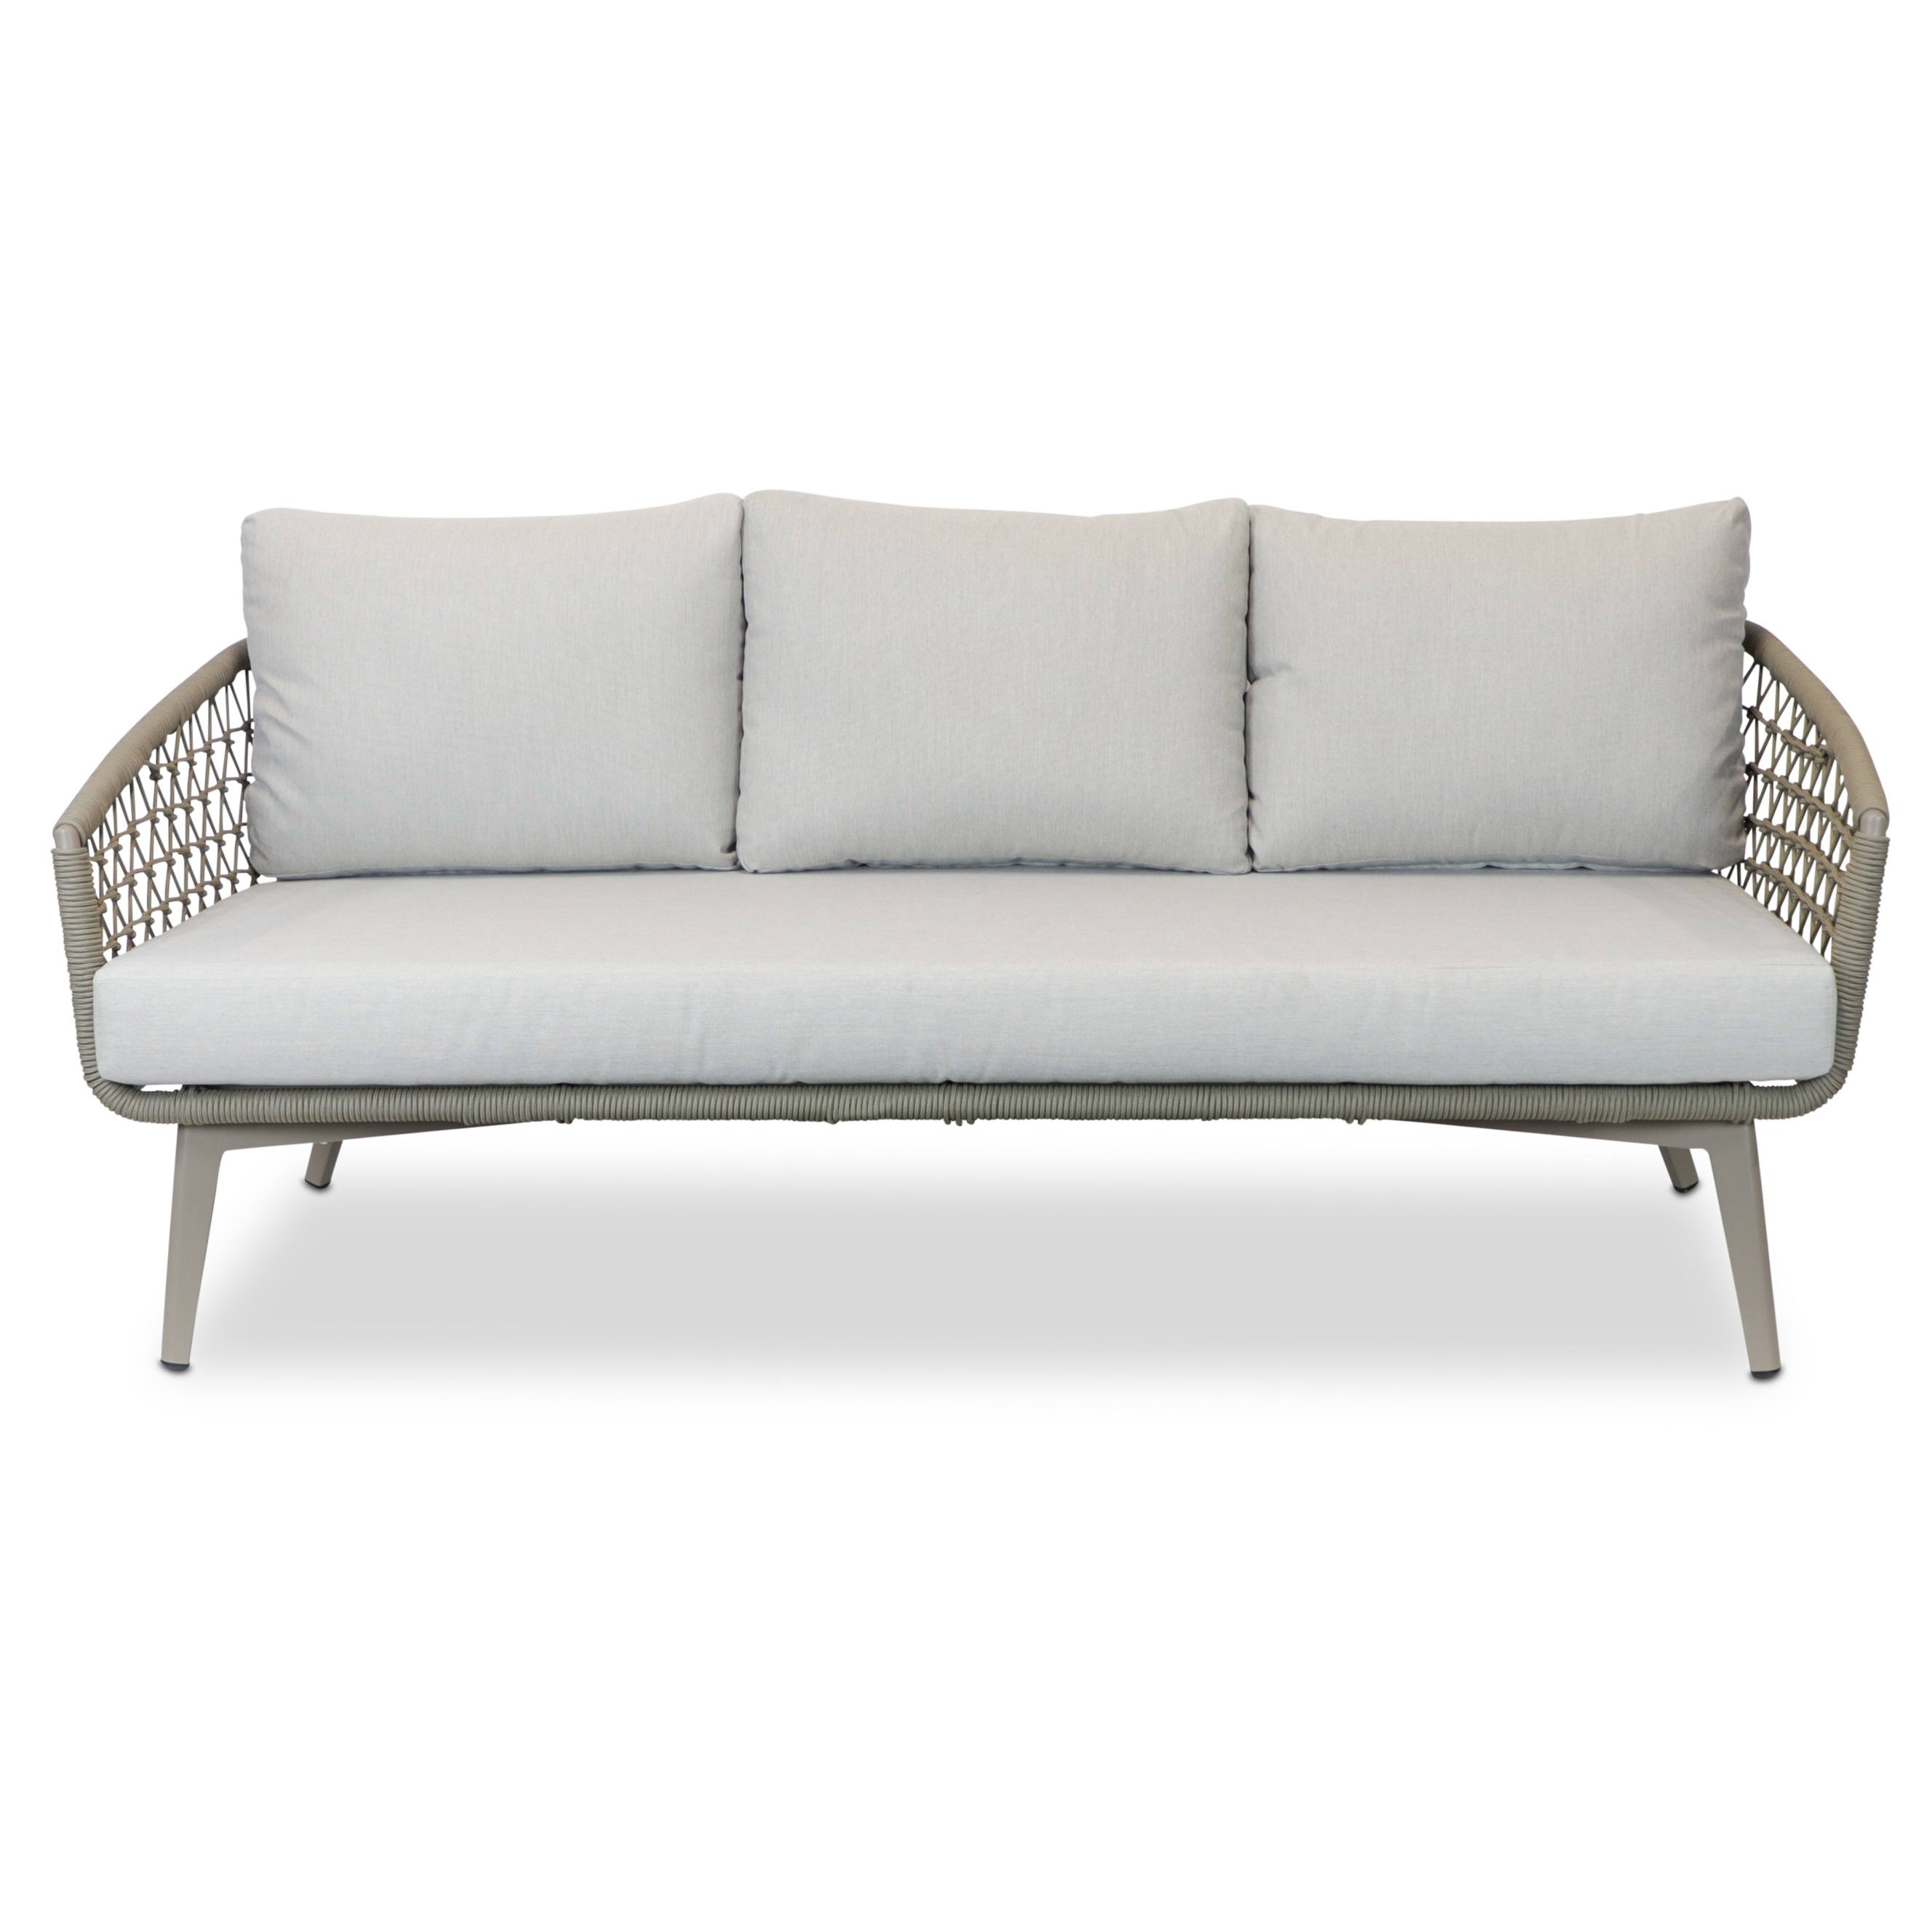 Antigua 3 Seater in Taupe with Dune Olefin Cushions and Rope